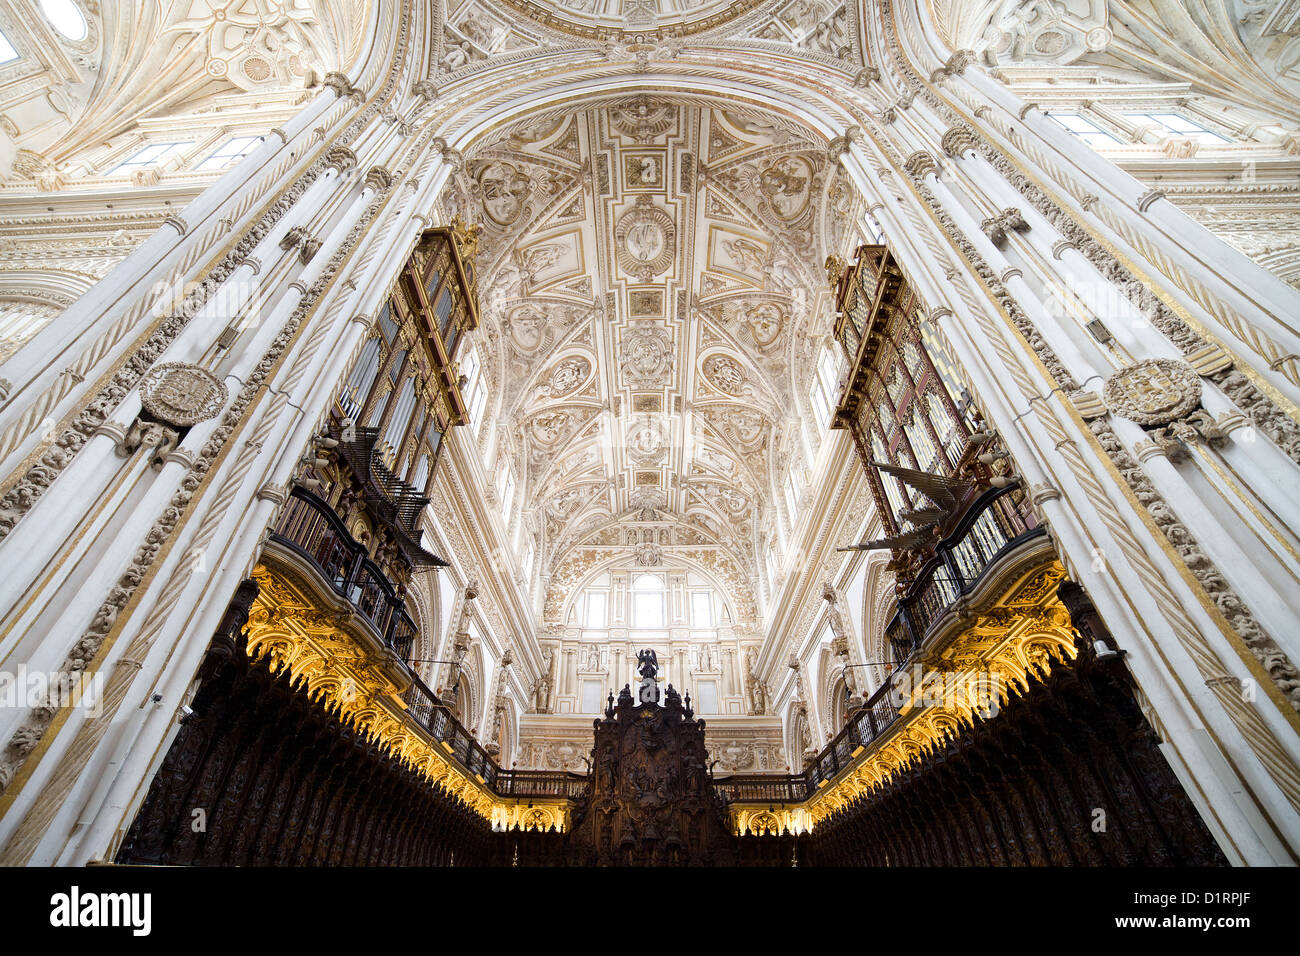 Mezquita Cathedral interior in Cordoba, Andalucia, Spain, lunette vault above the mahogany choir stalls. Stock Photo